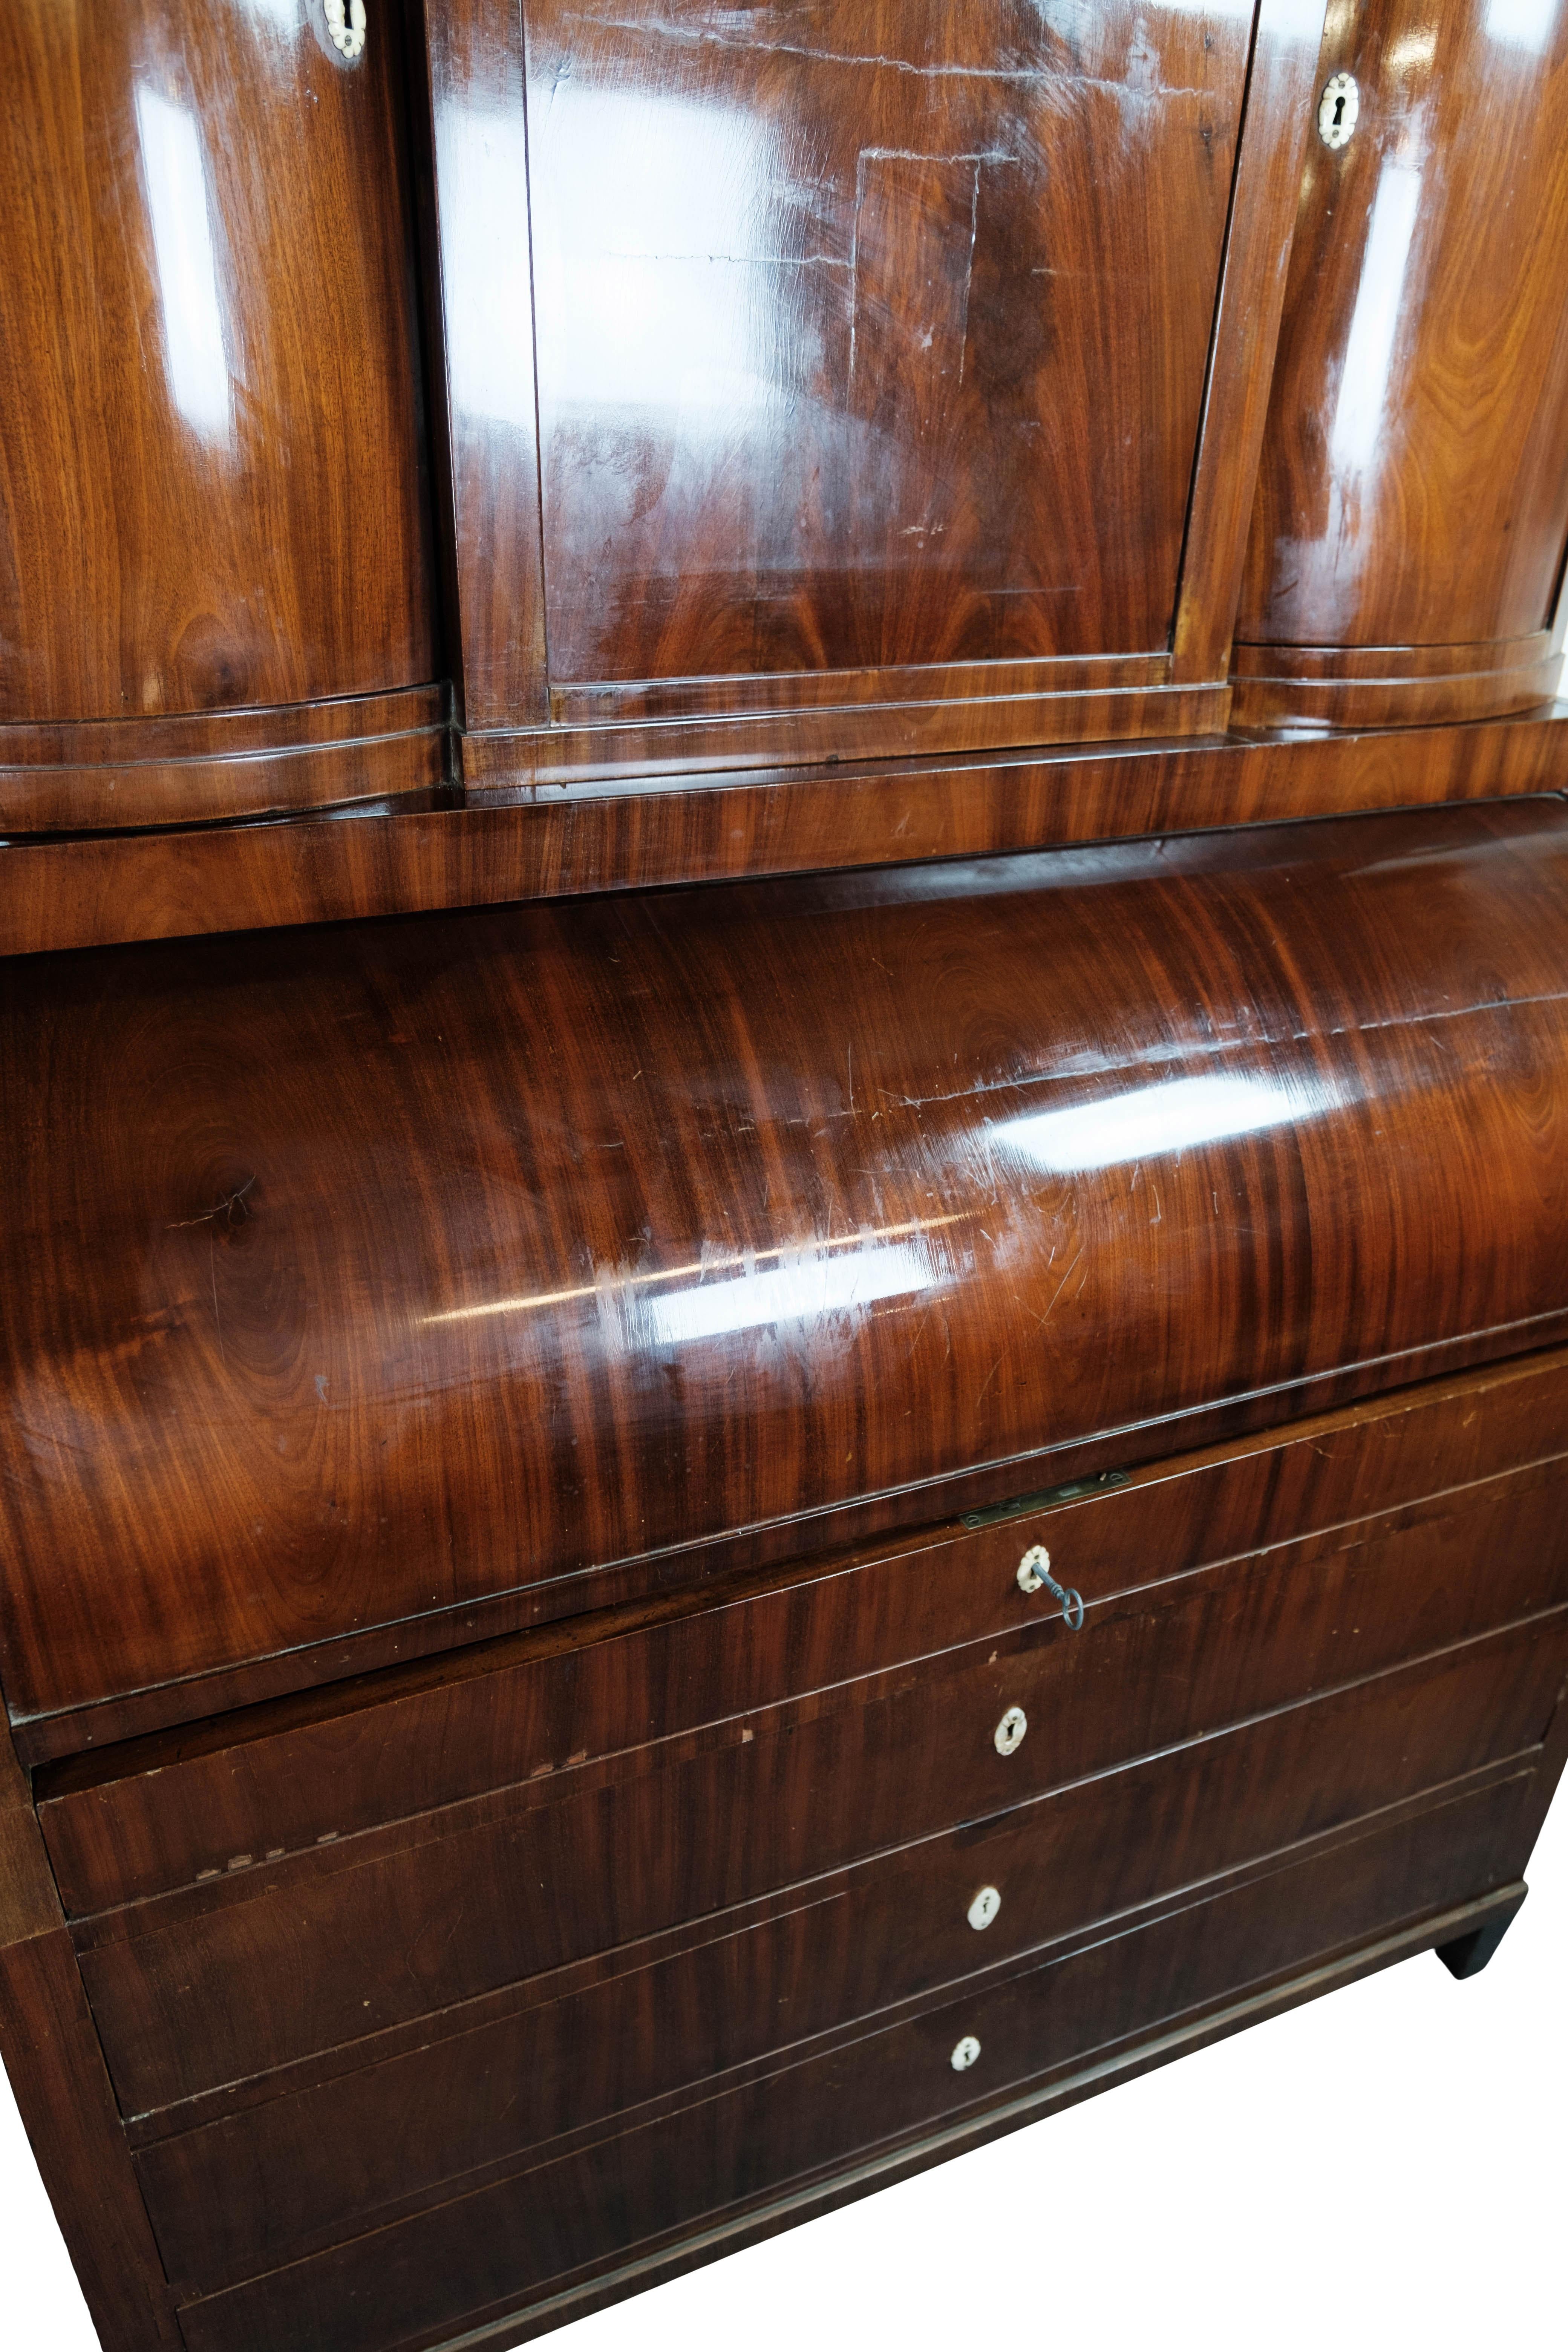 Danish Large Empire Bureau Of Hand Polished Mahogany With Inlaid Wood from 1820s For Sale